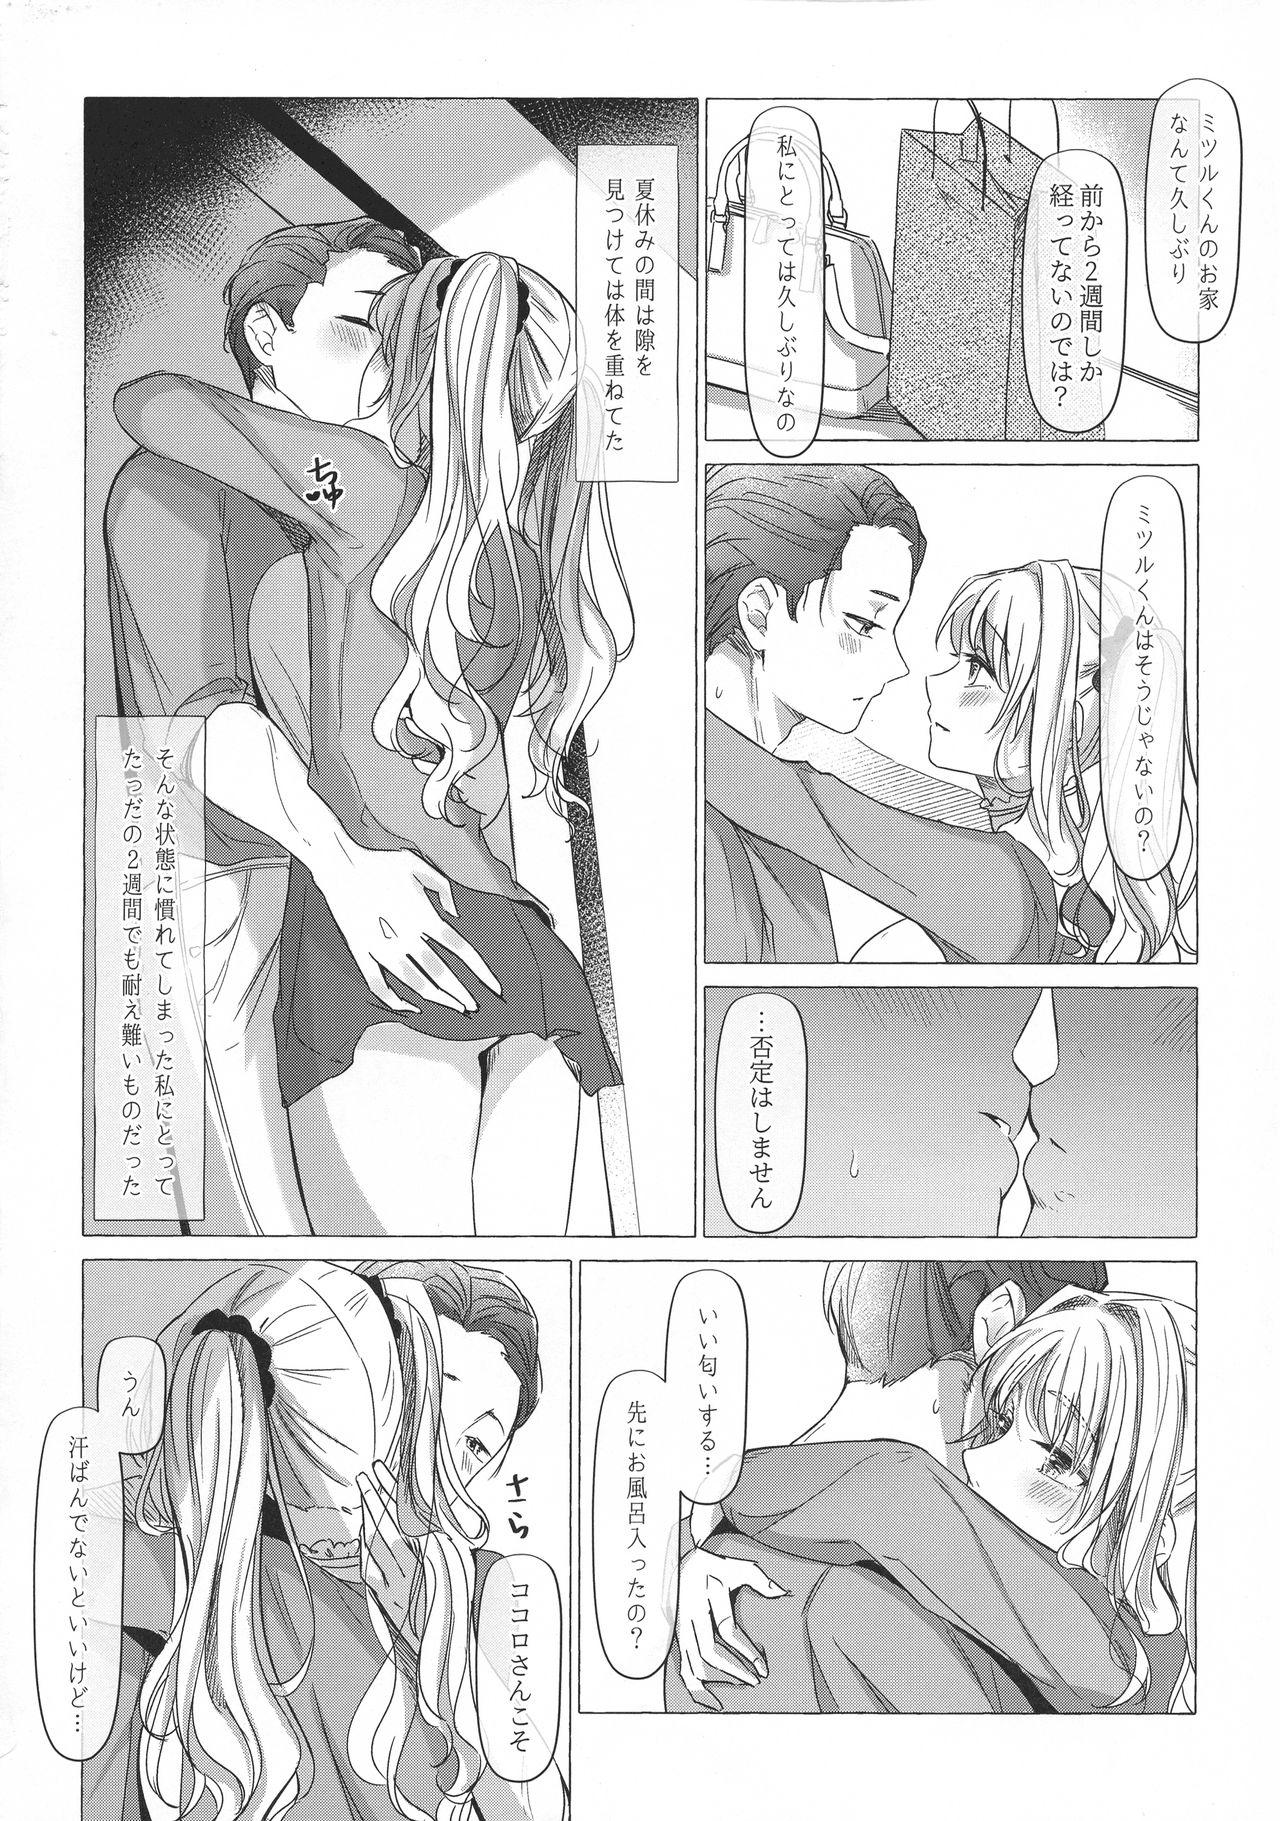 Glory Hole 満心総意の躾 - Darling in the franxx Ffm - Page 11